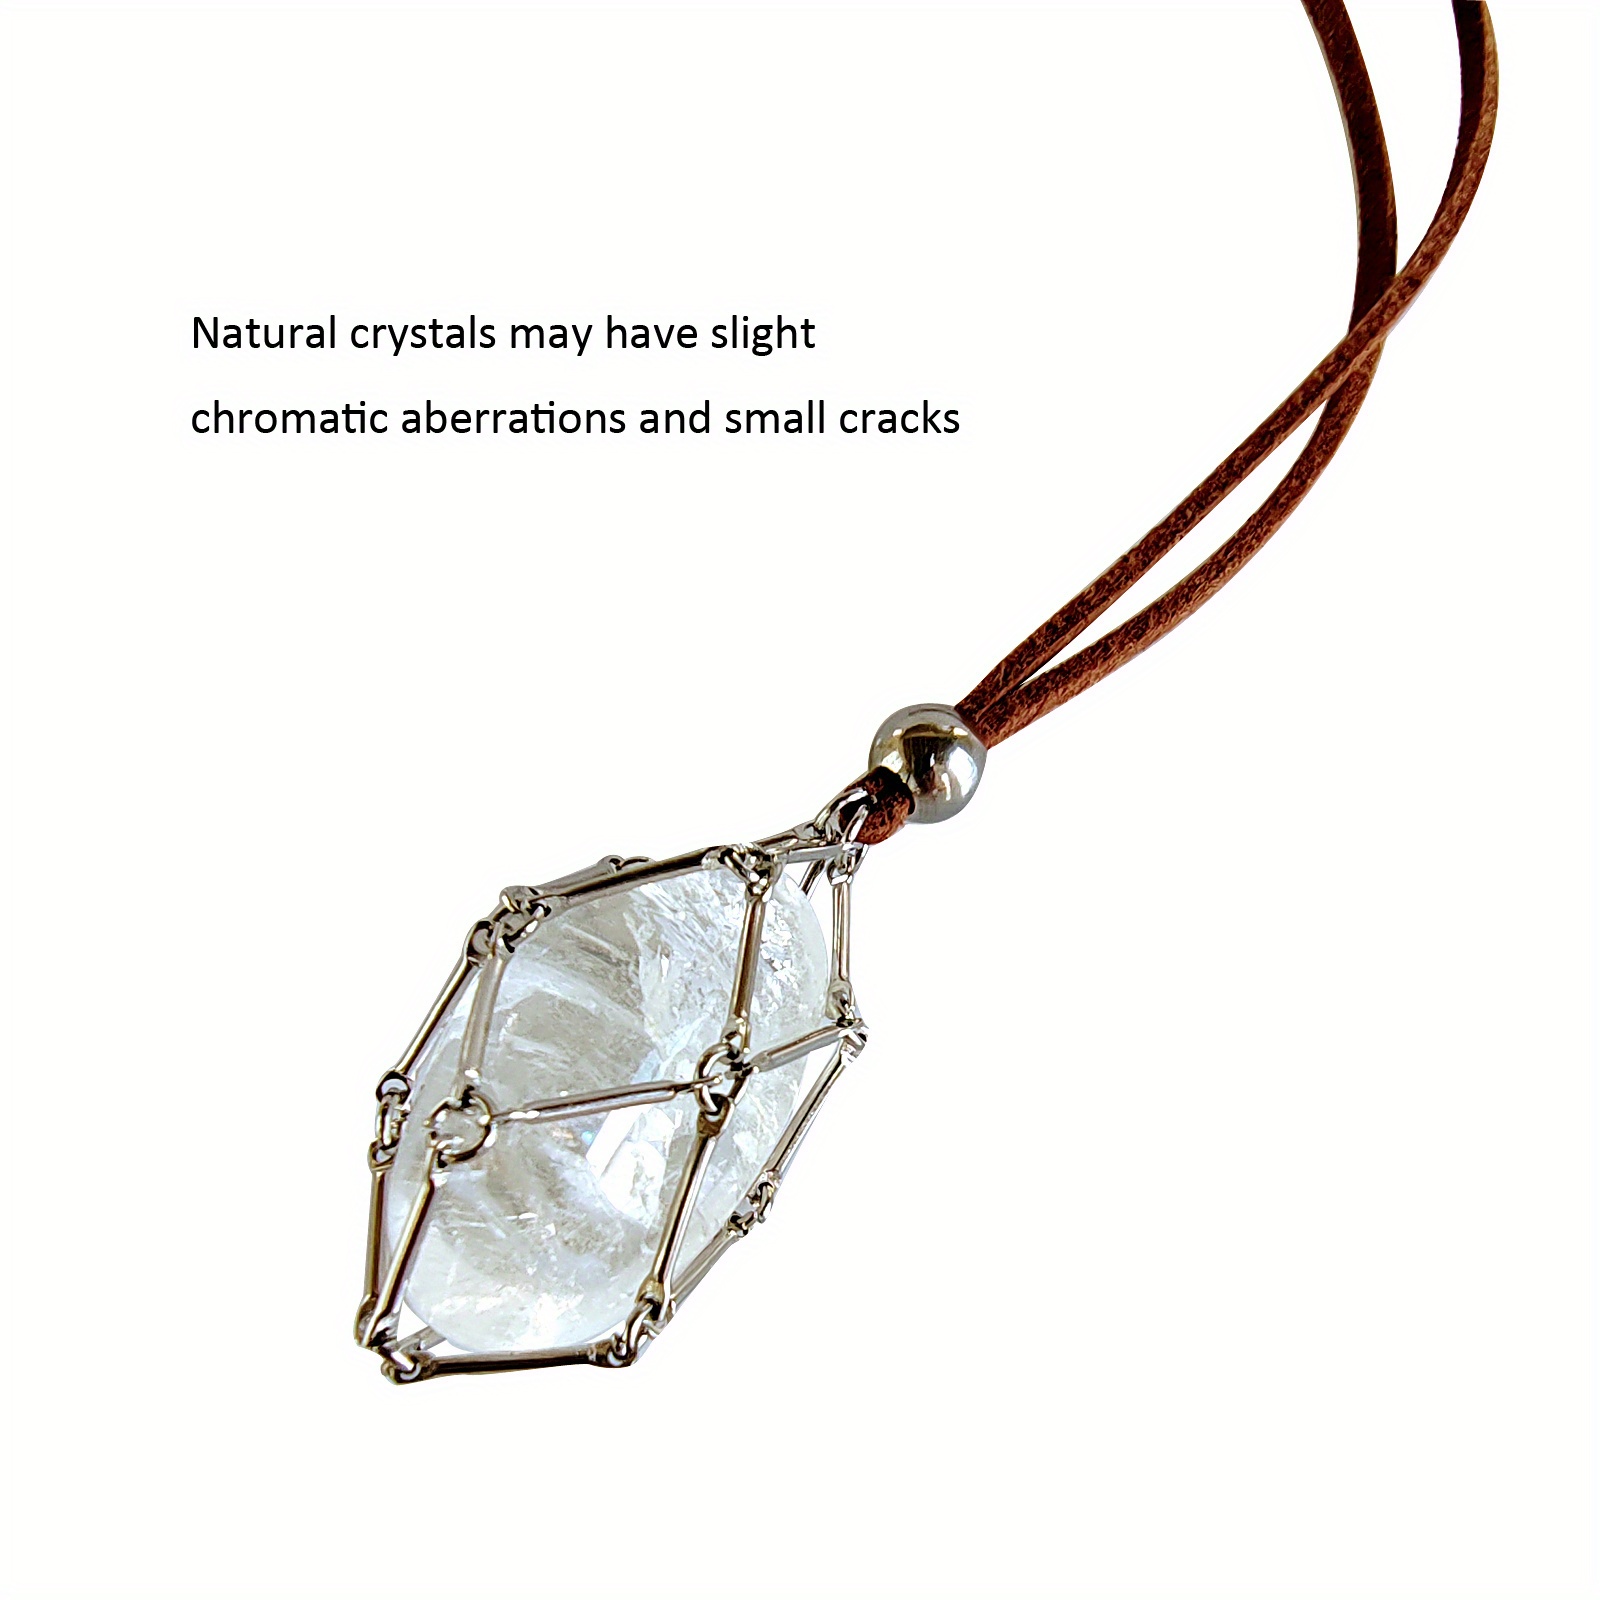 SAOYOAS Crystal Necklace Holder, Necklaces Cage Cords for Crystals